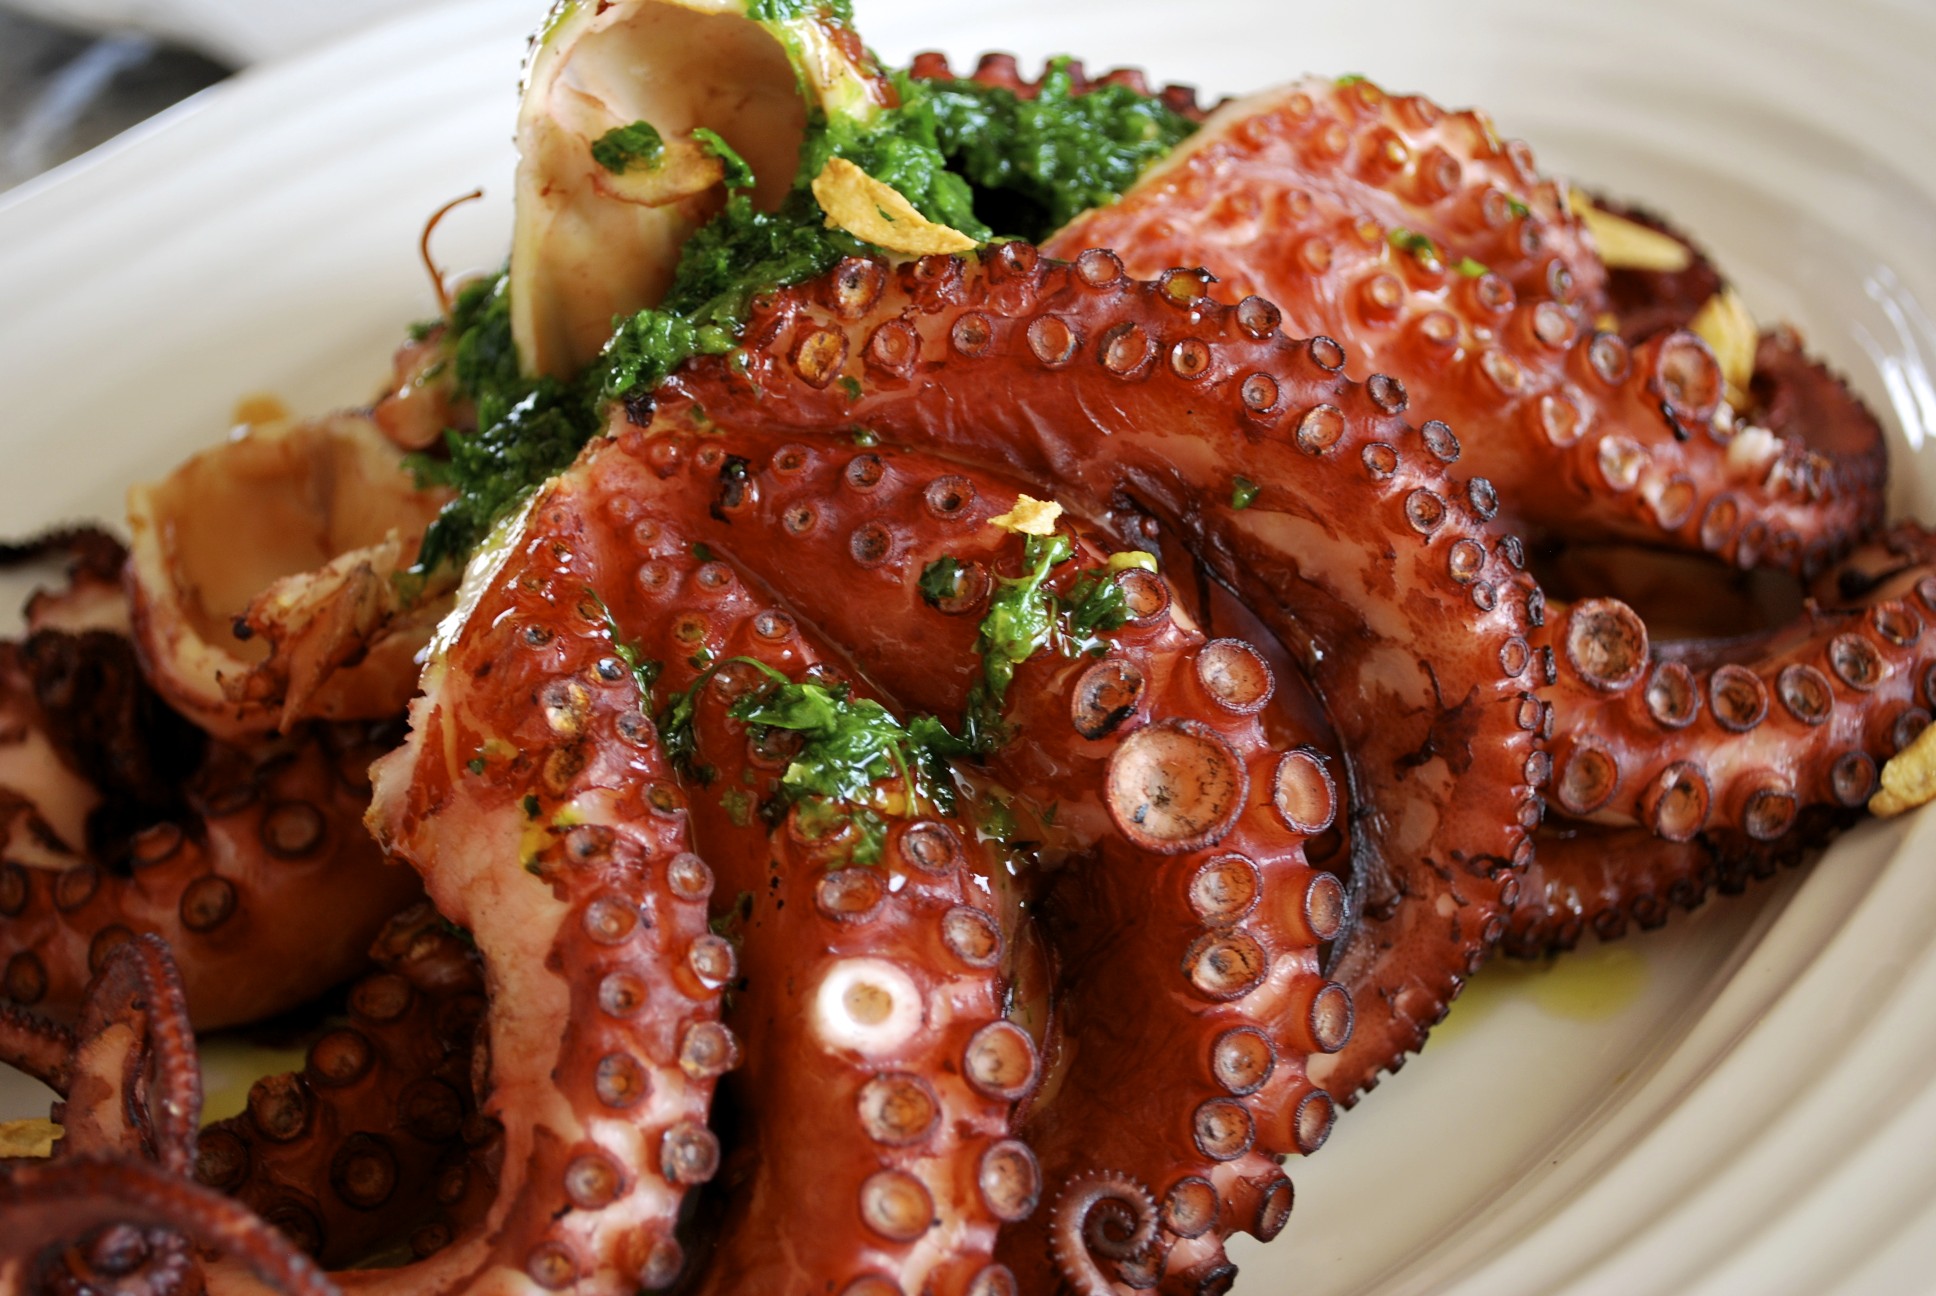 Check out the recommended restaurants by Portugal's Michelin Guide